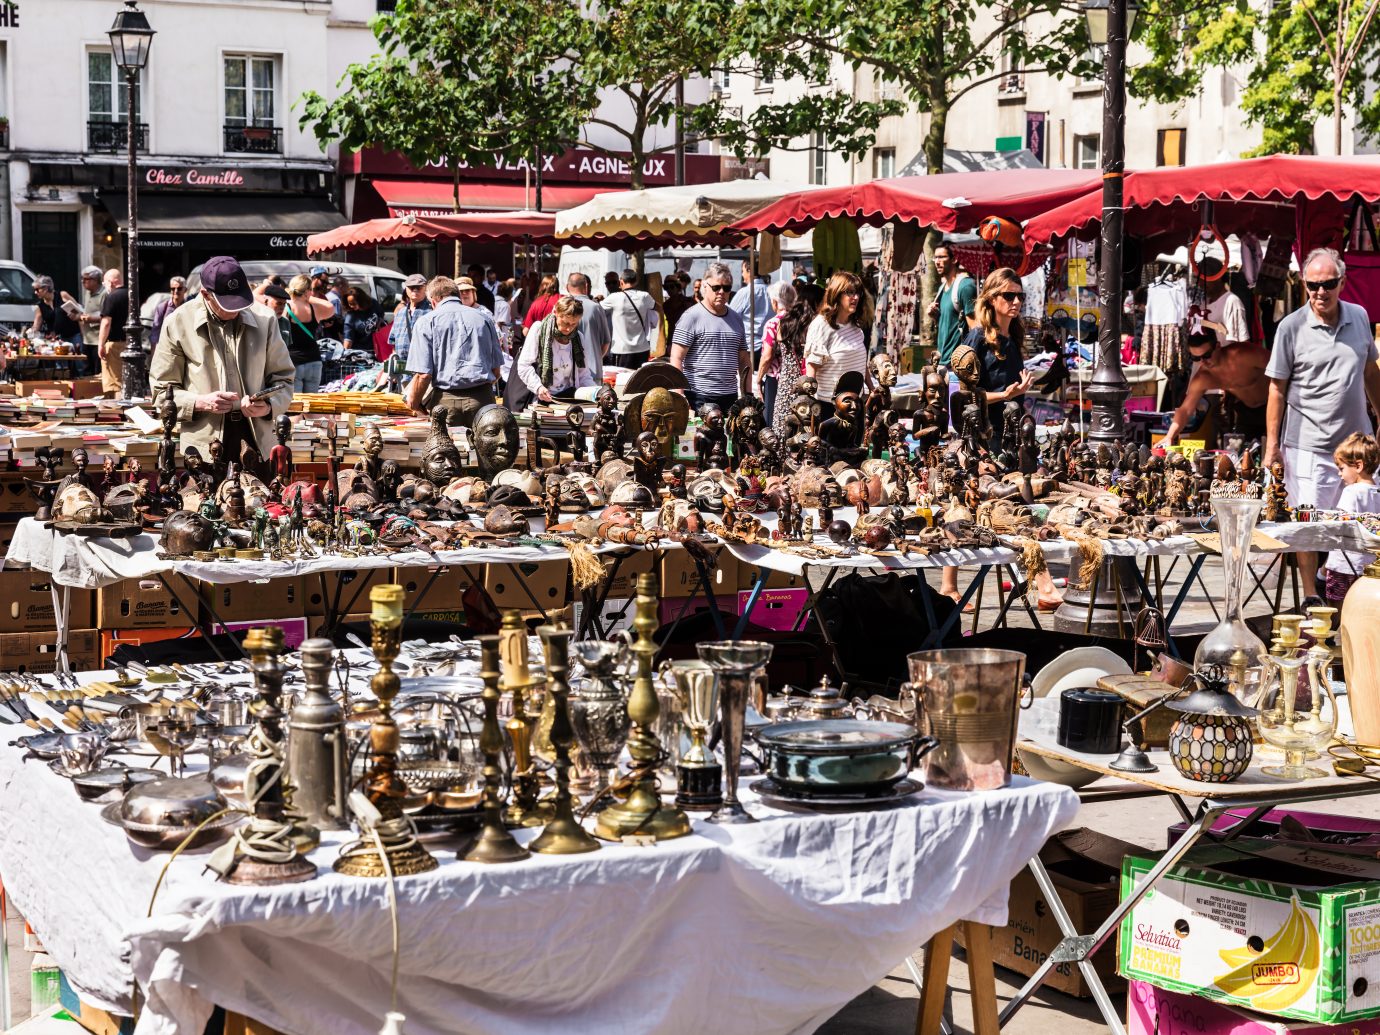 People choosing rare and used books, wooden masks and figures of African culture at the historic flea Aligre Market (Marche d'Aligre) in the Bastille district.